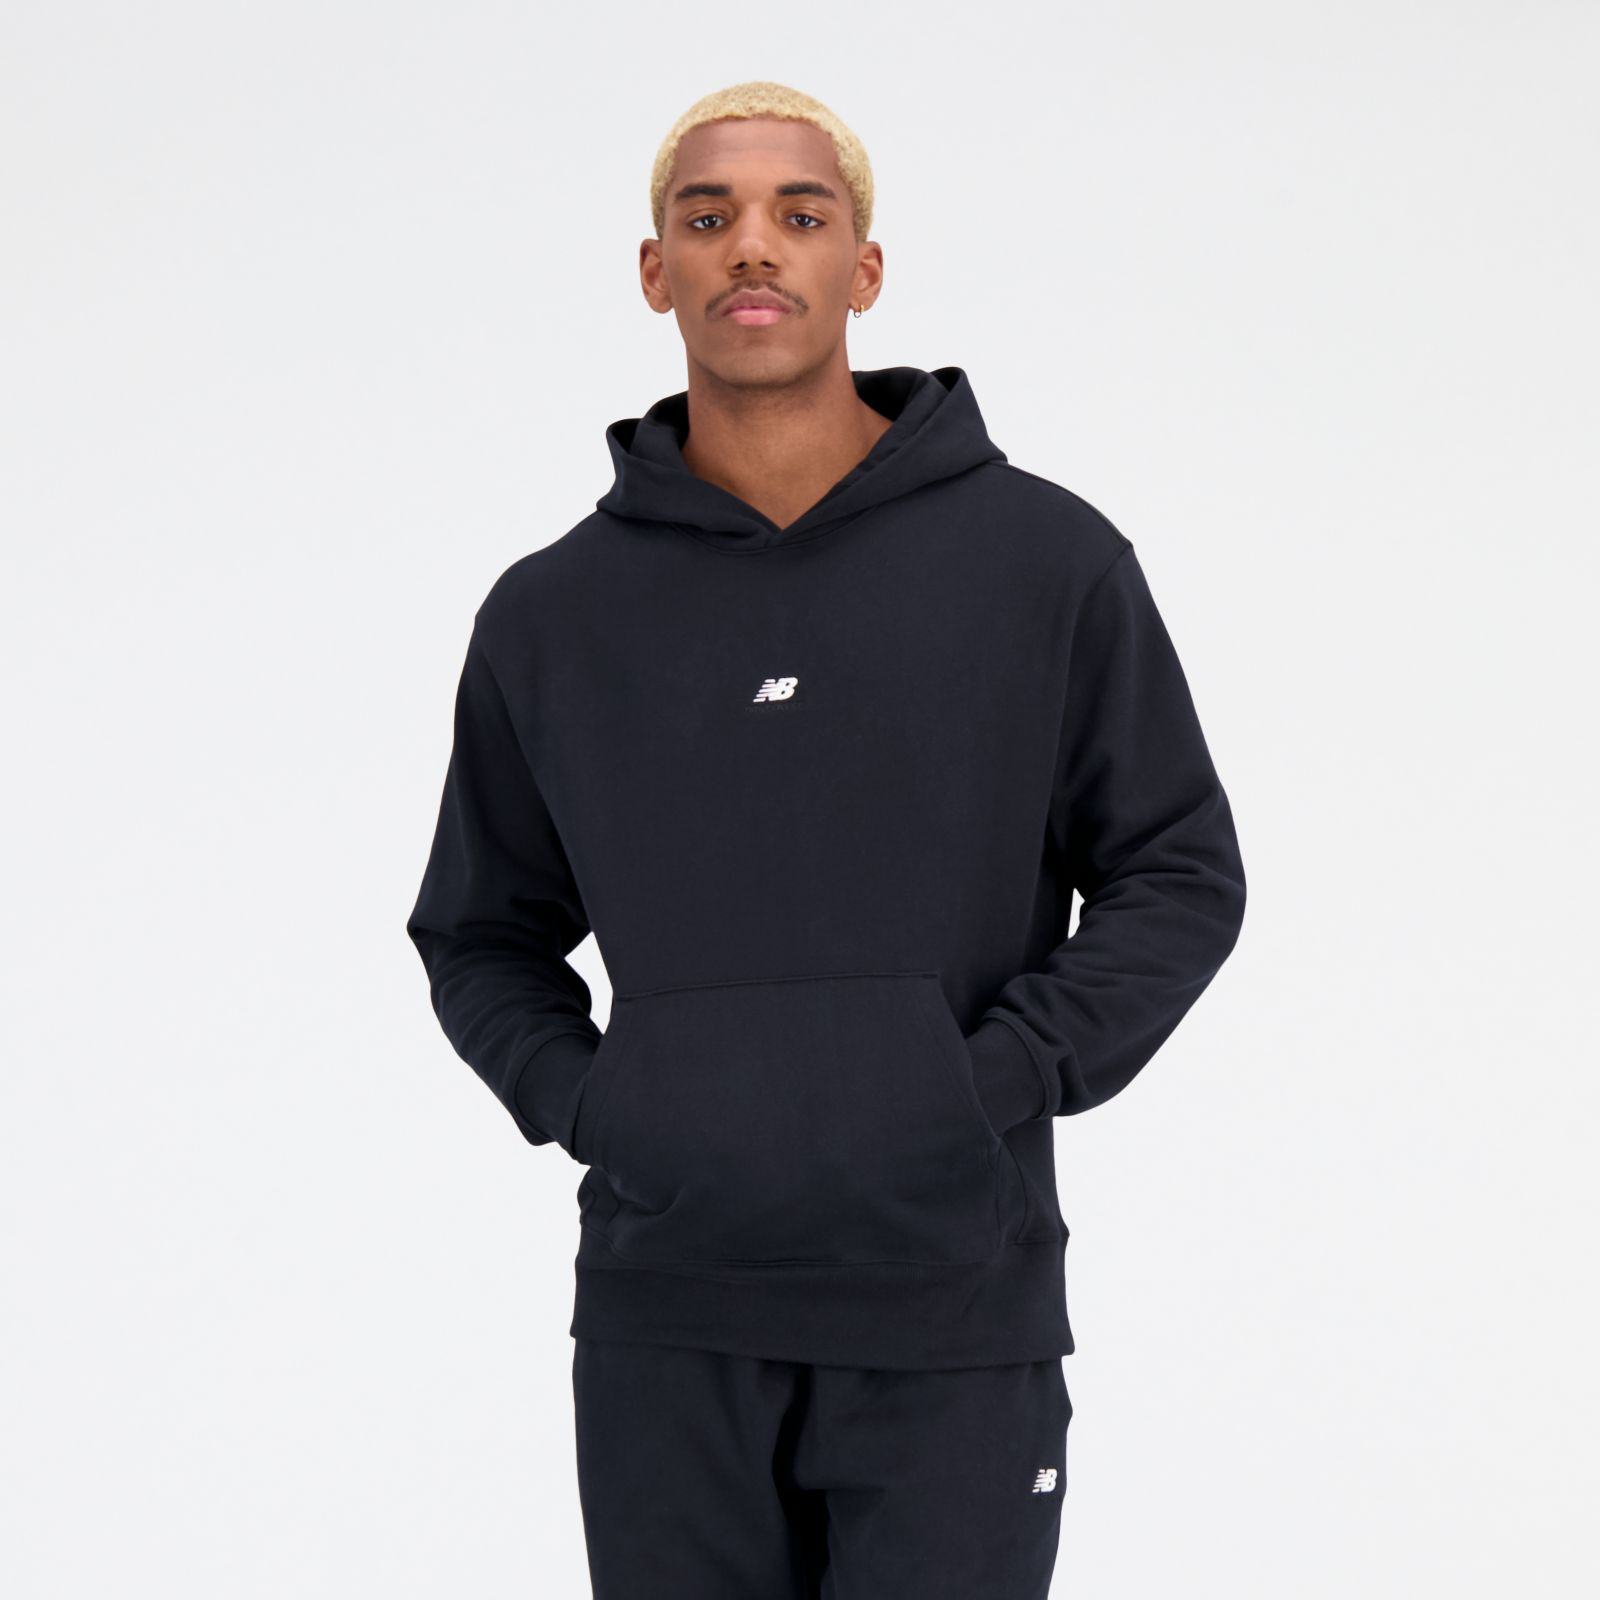 Men's French Terry Pullover Hoodie 454692 - Personal watercraft